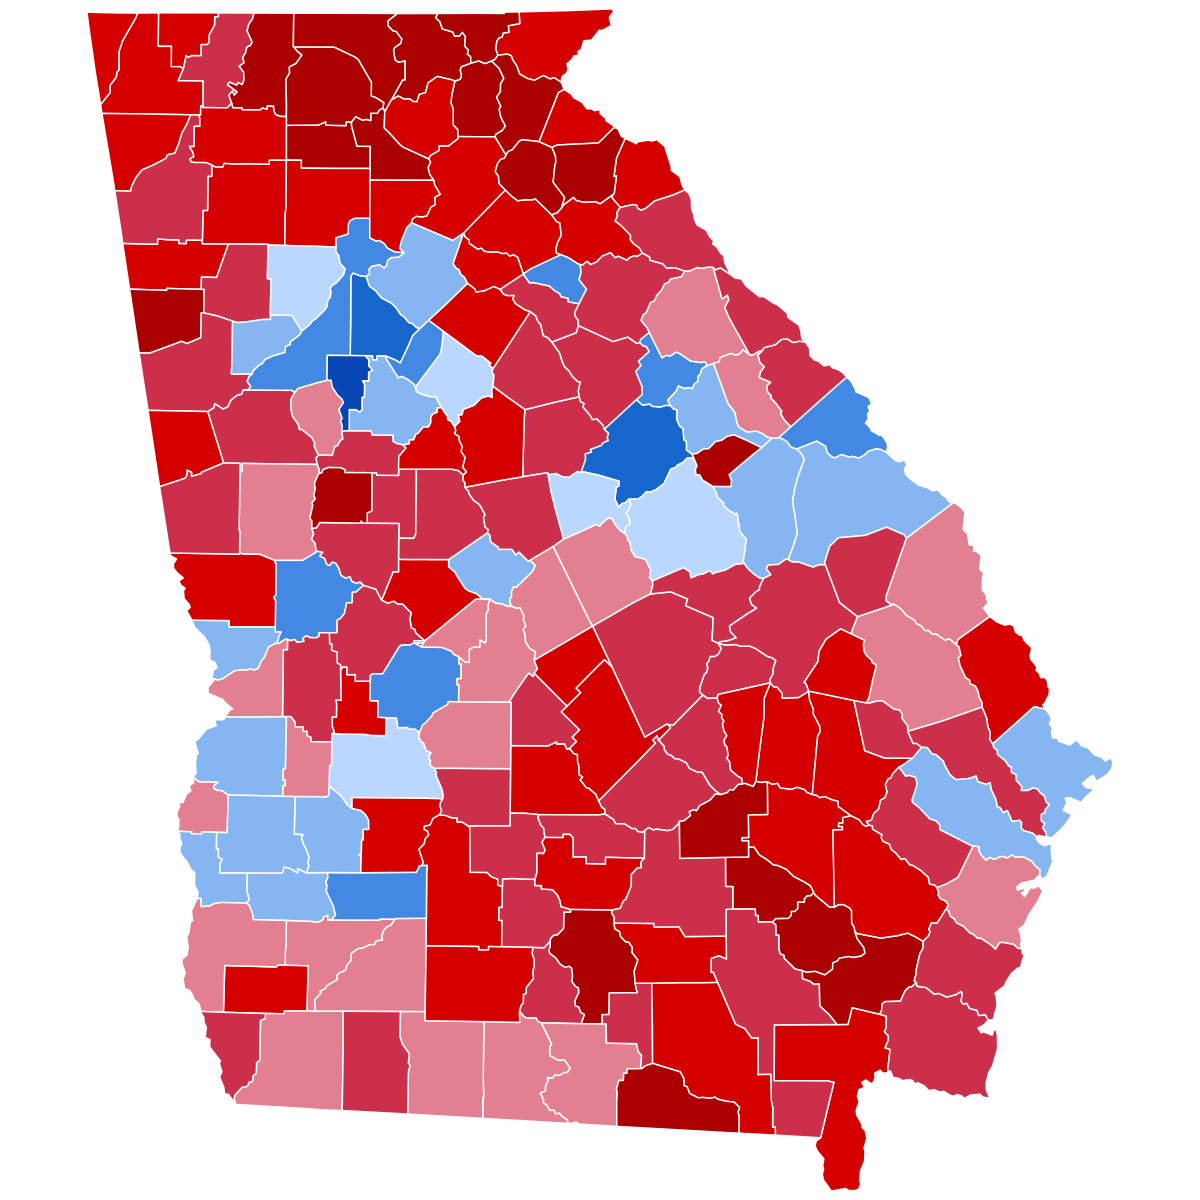 2016 united states presidential election in georgia